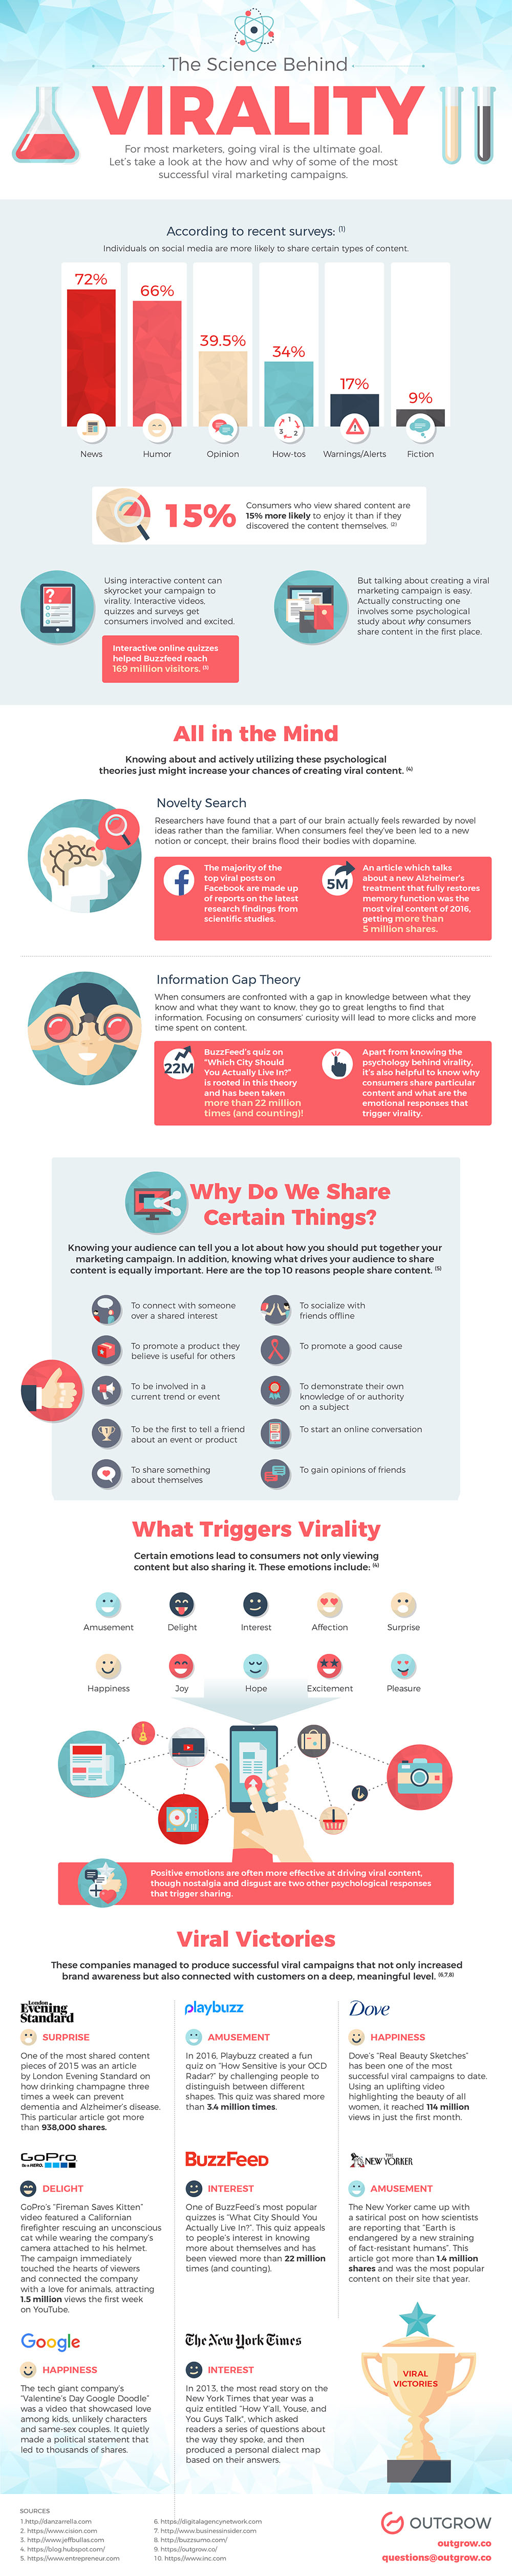 The Science Behind Virality